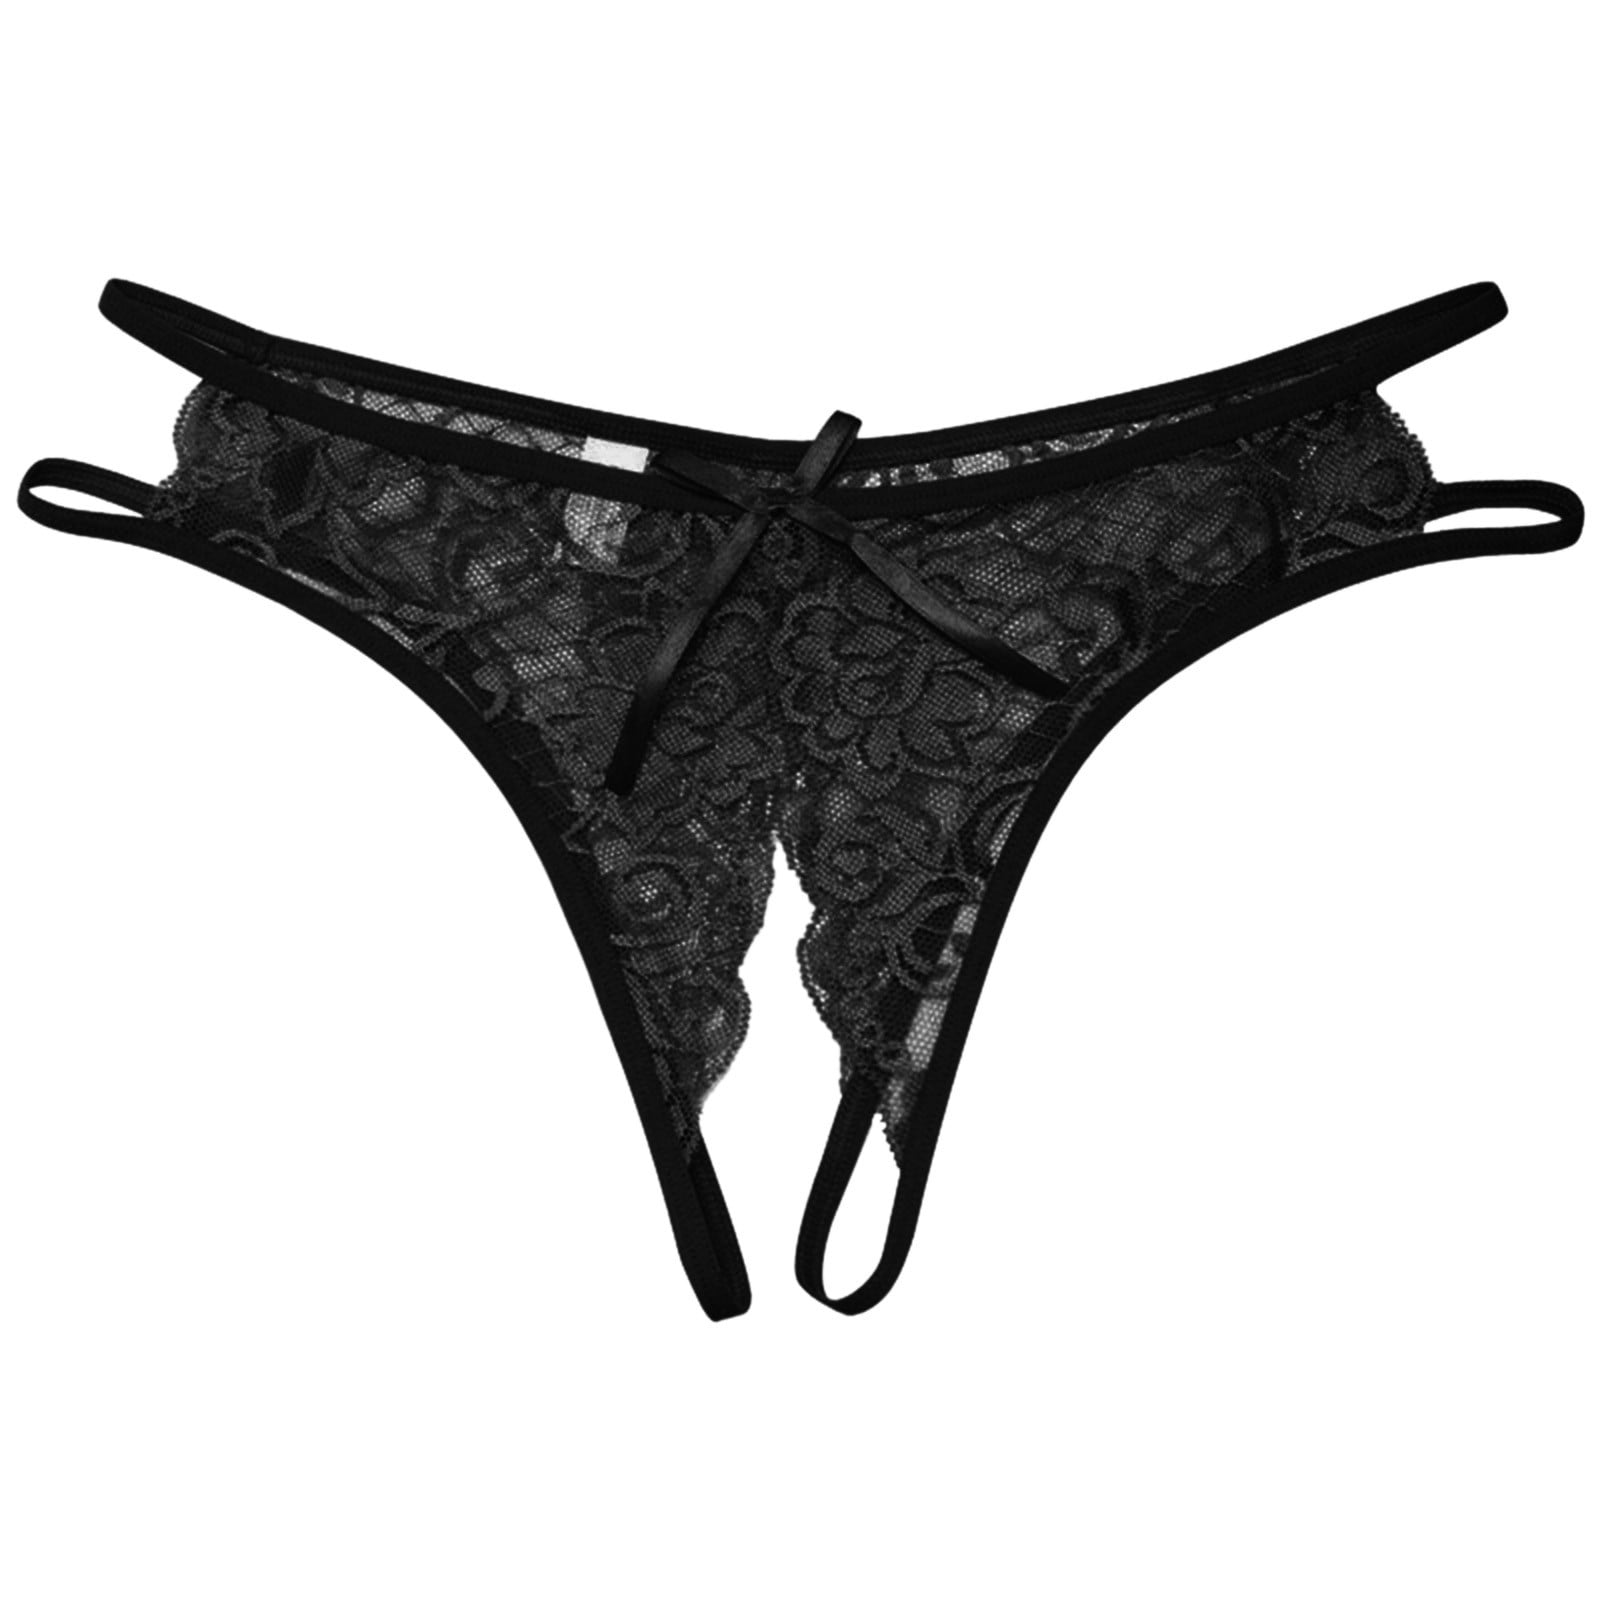 MRULIC intimates for women Panties Lingerie Women Lowwaist Briefs Lace  Thong GString Embroidery Black + One size 